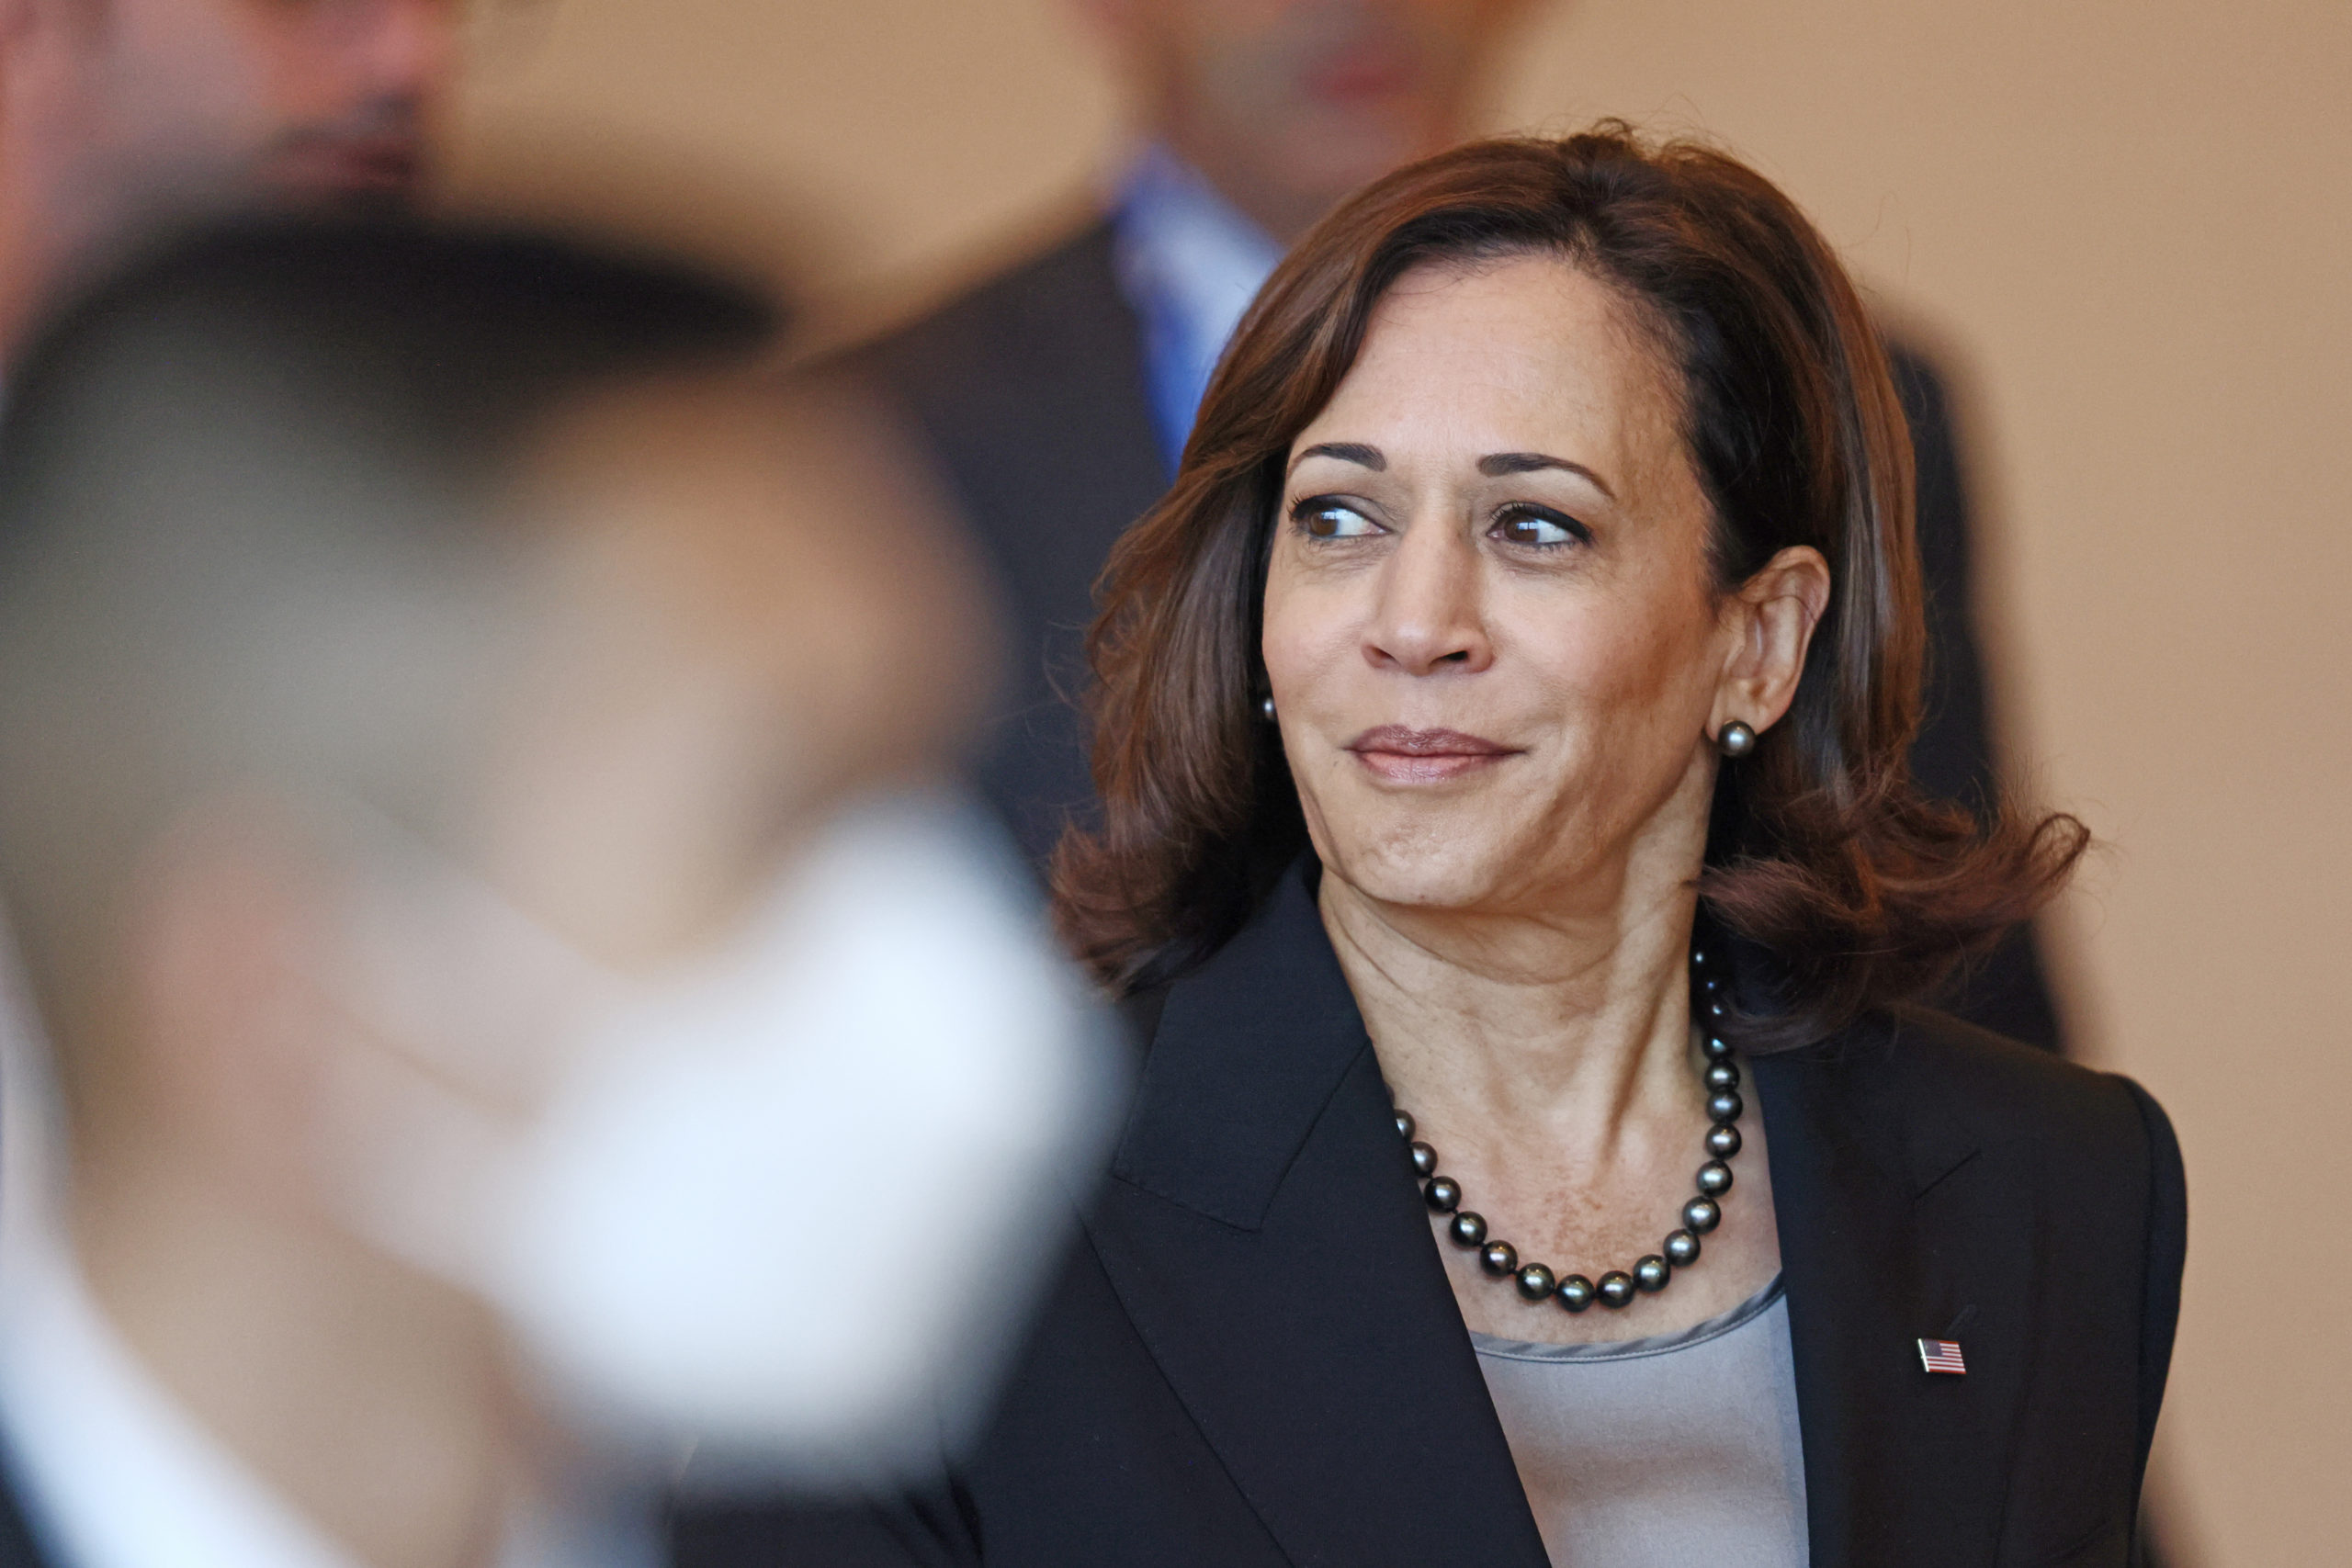 Vice President Kamala Harris arrives at the APEC Economic Leaders Meeting during the APEC summit in Bangkok, Thailand, on Saturday.